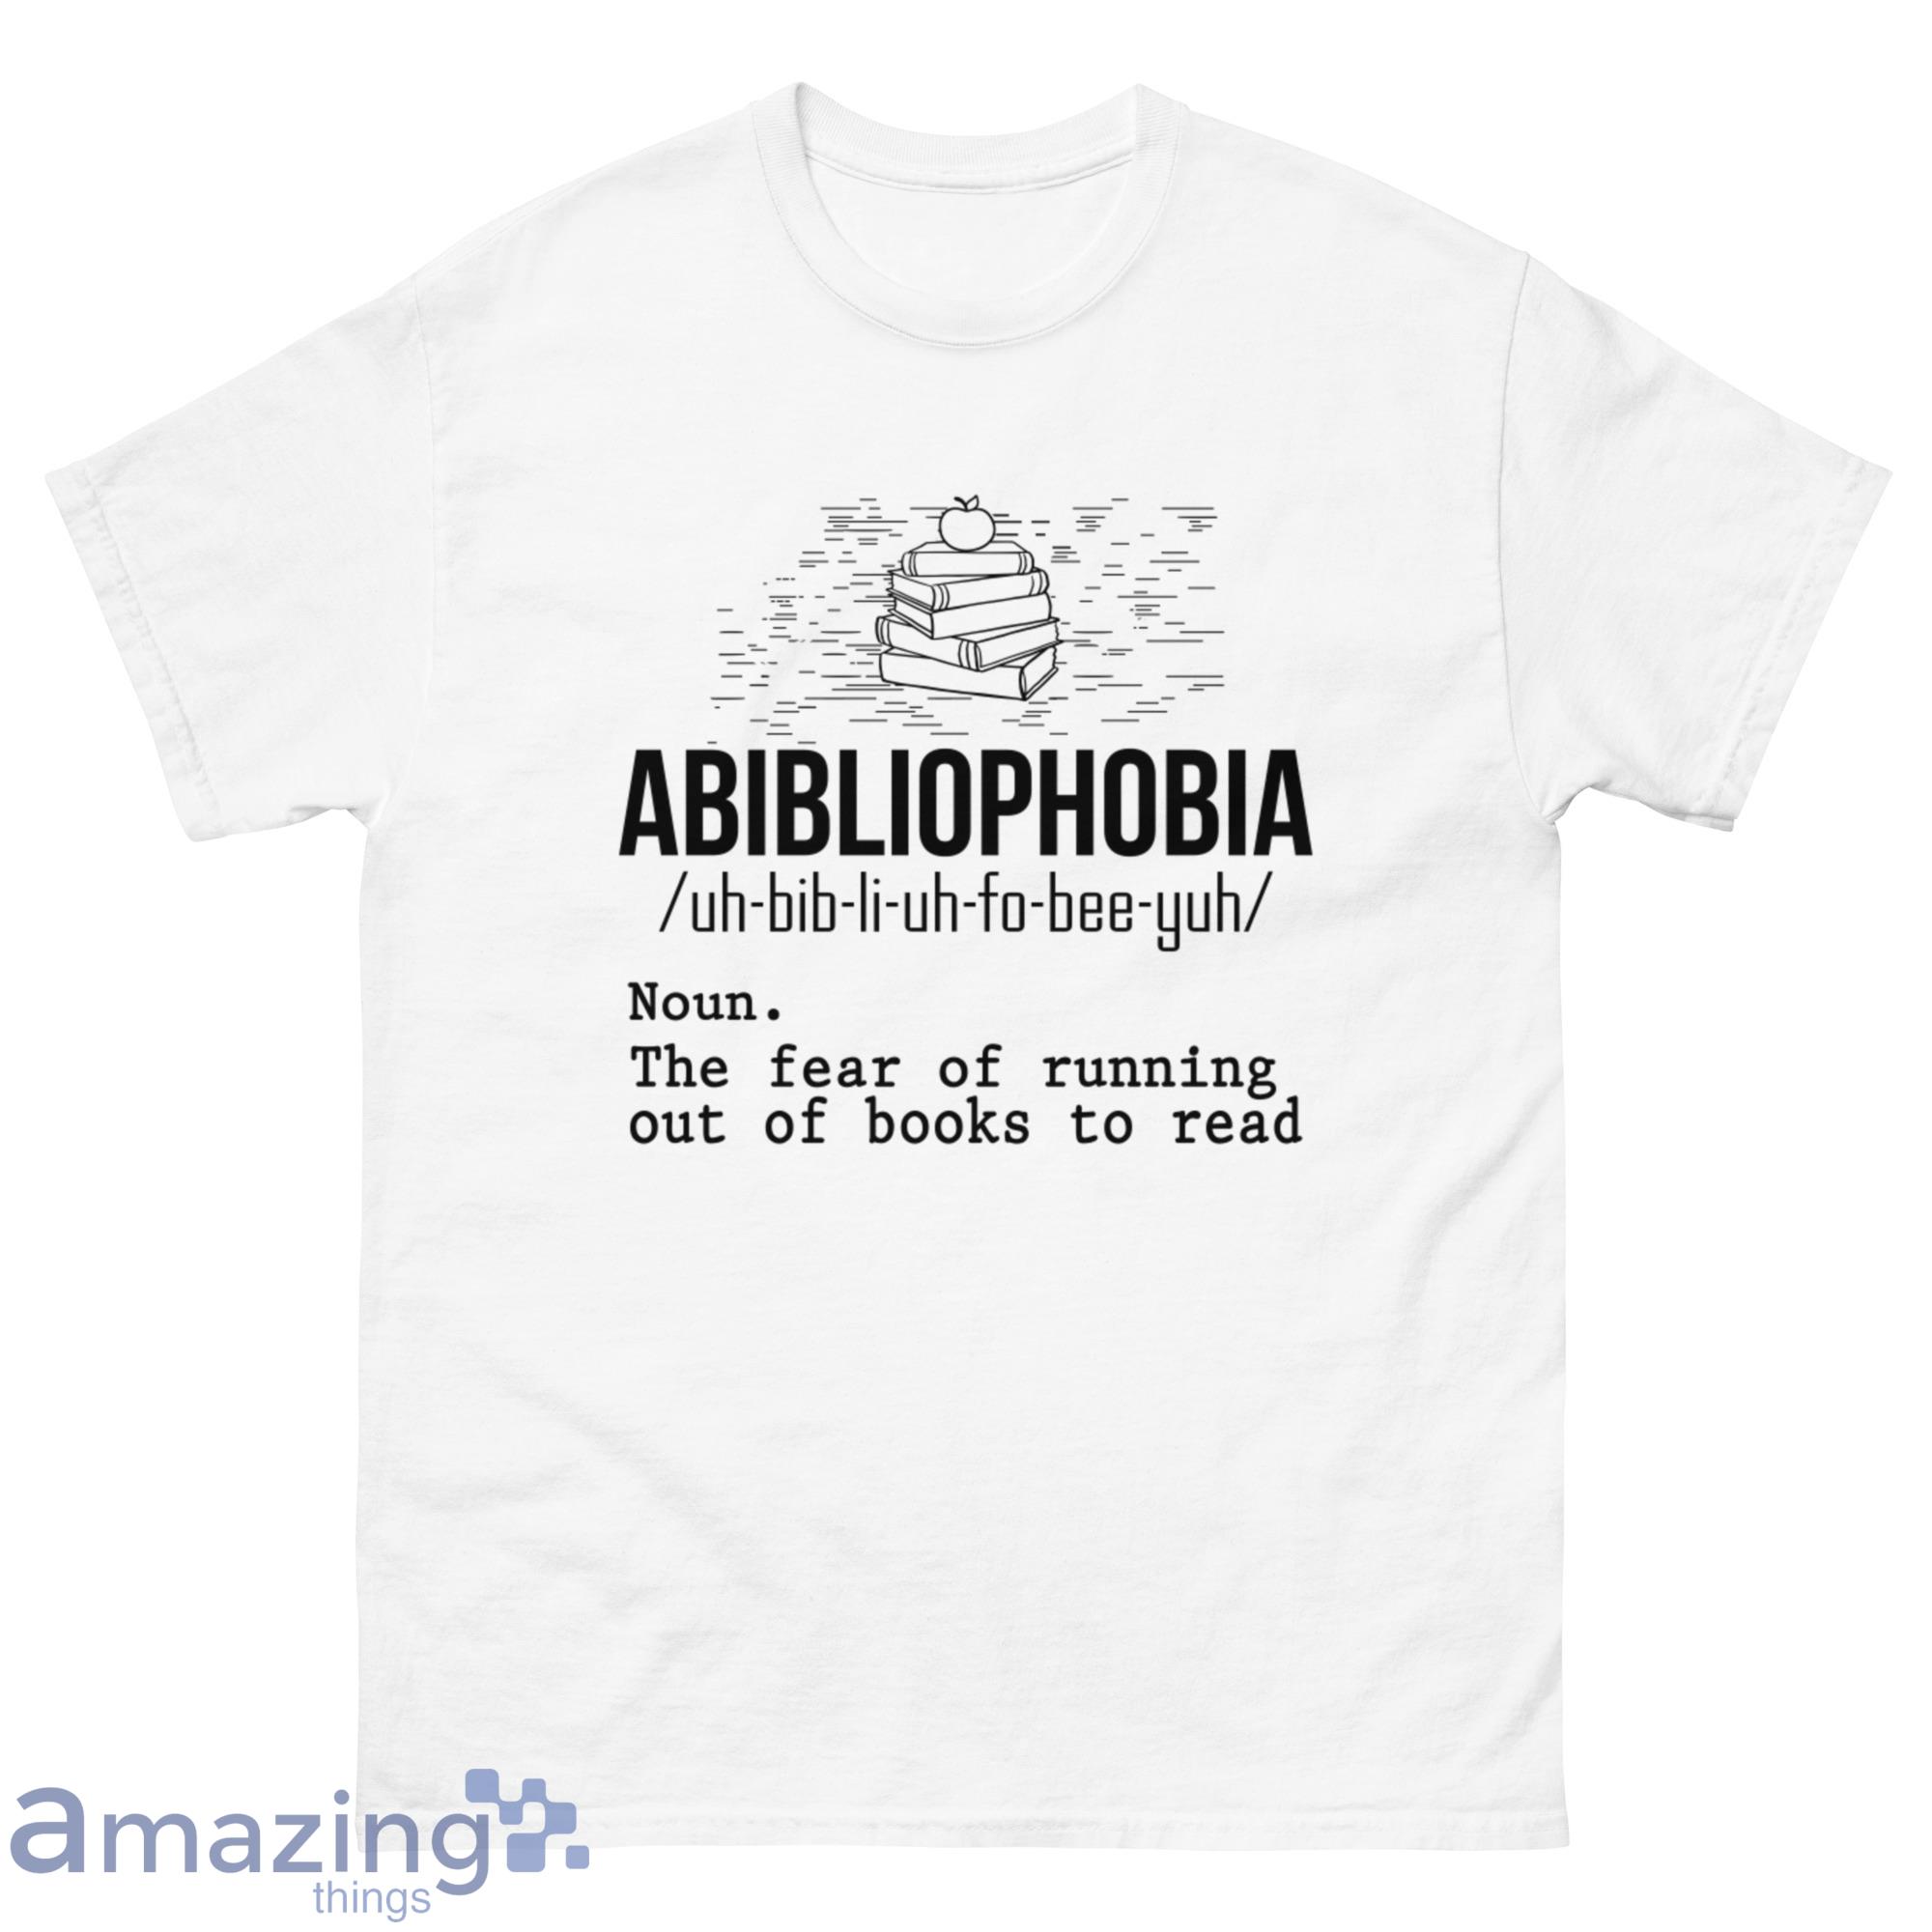 Abibliophobia (Noun) The Fear Of Running Out Of Books To Read Shirt - G500 Men’s Classic T-Shirt-1